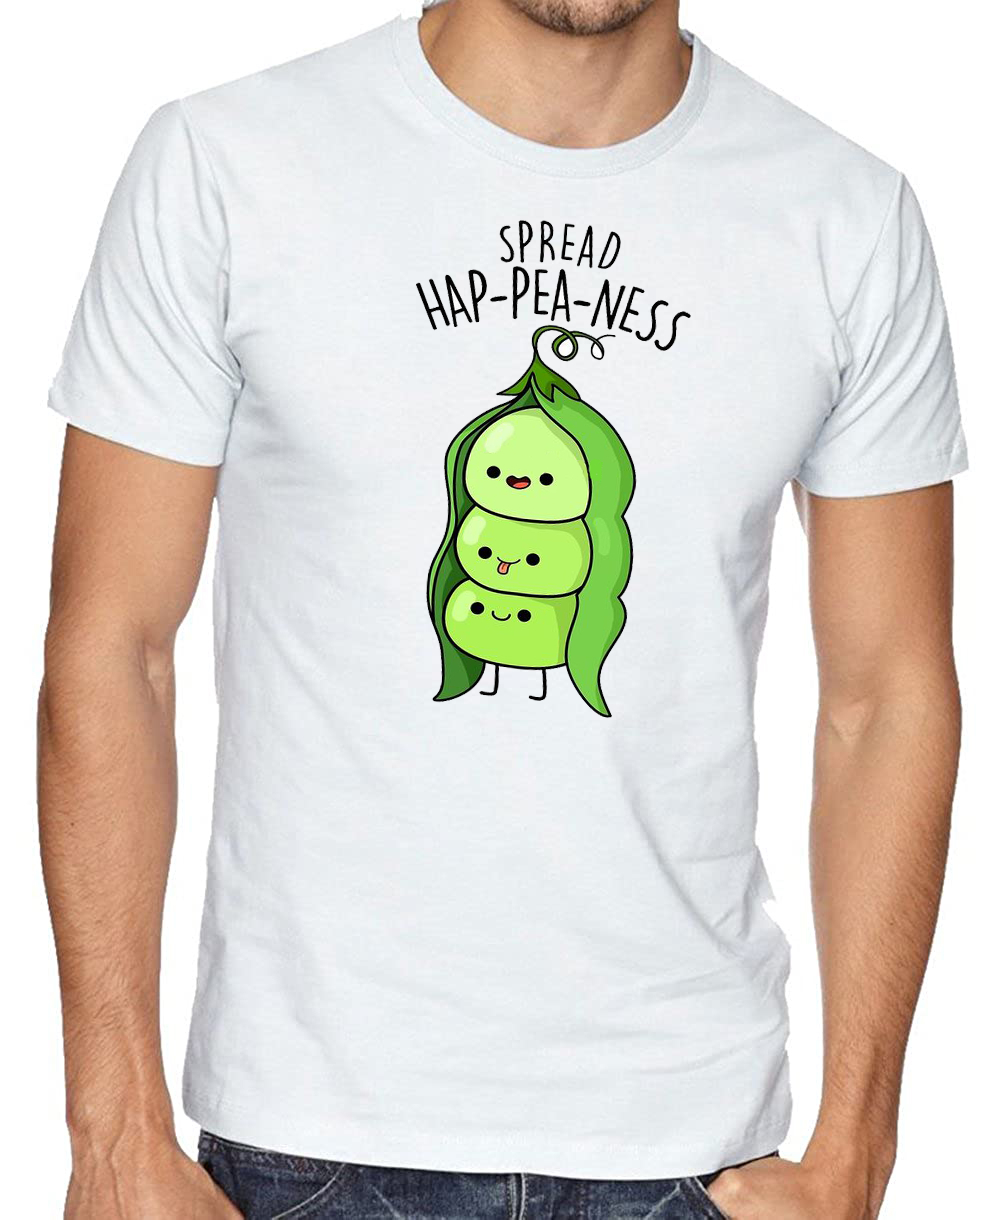 Spread Happiness T-shirt